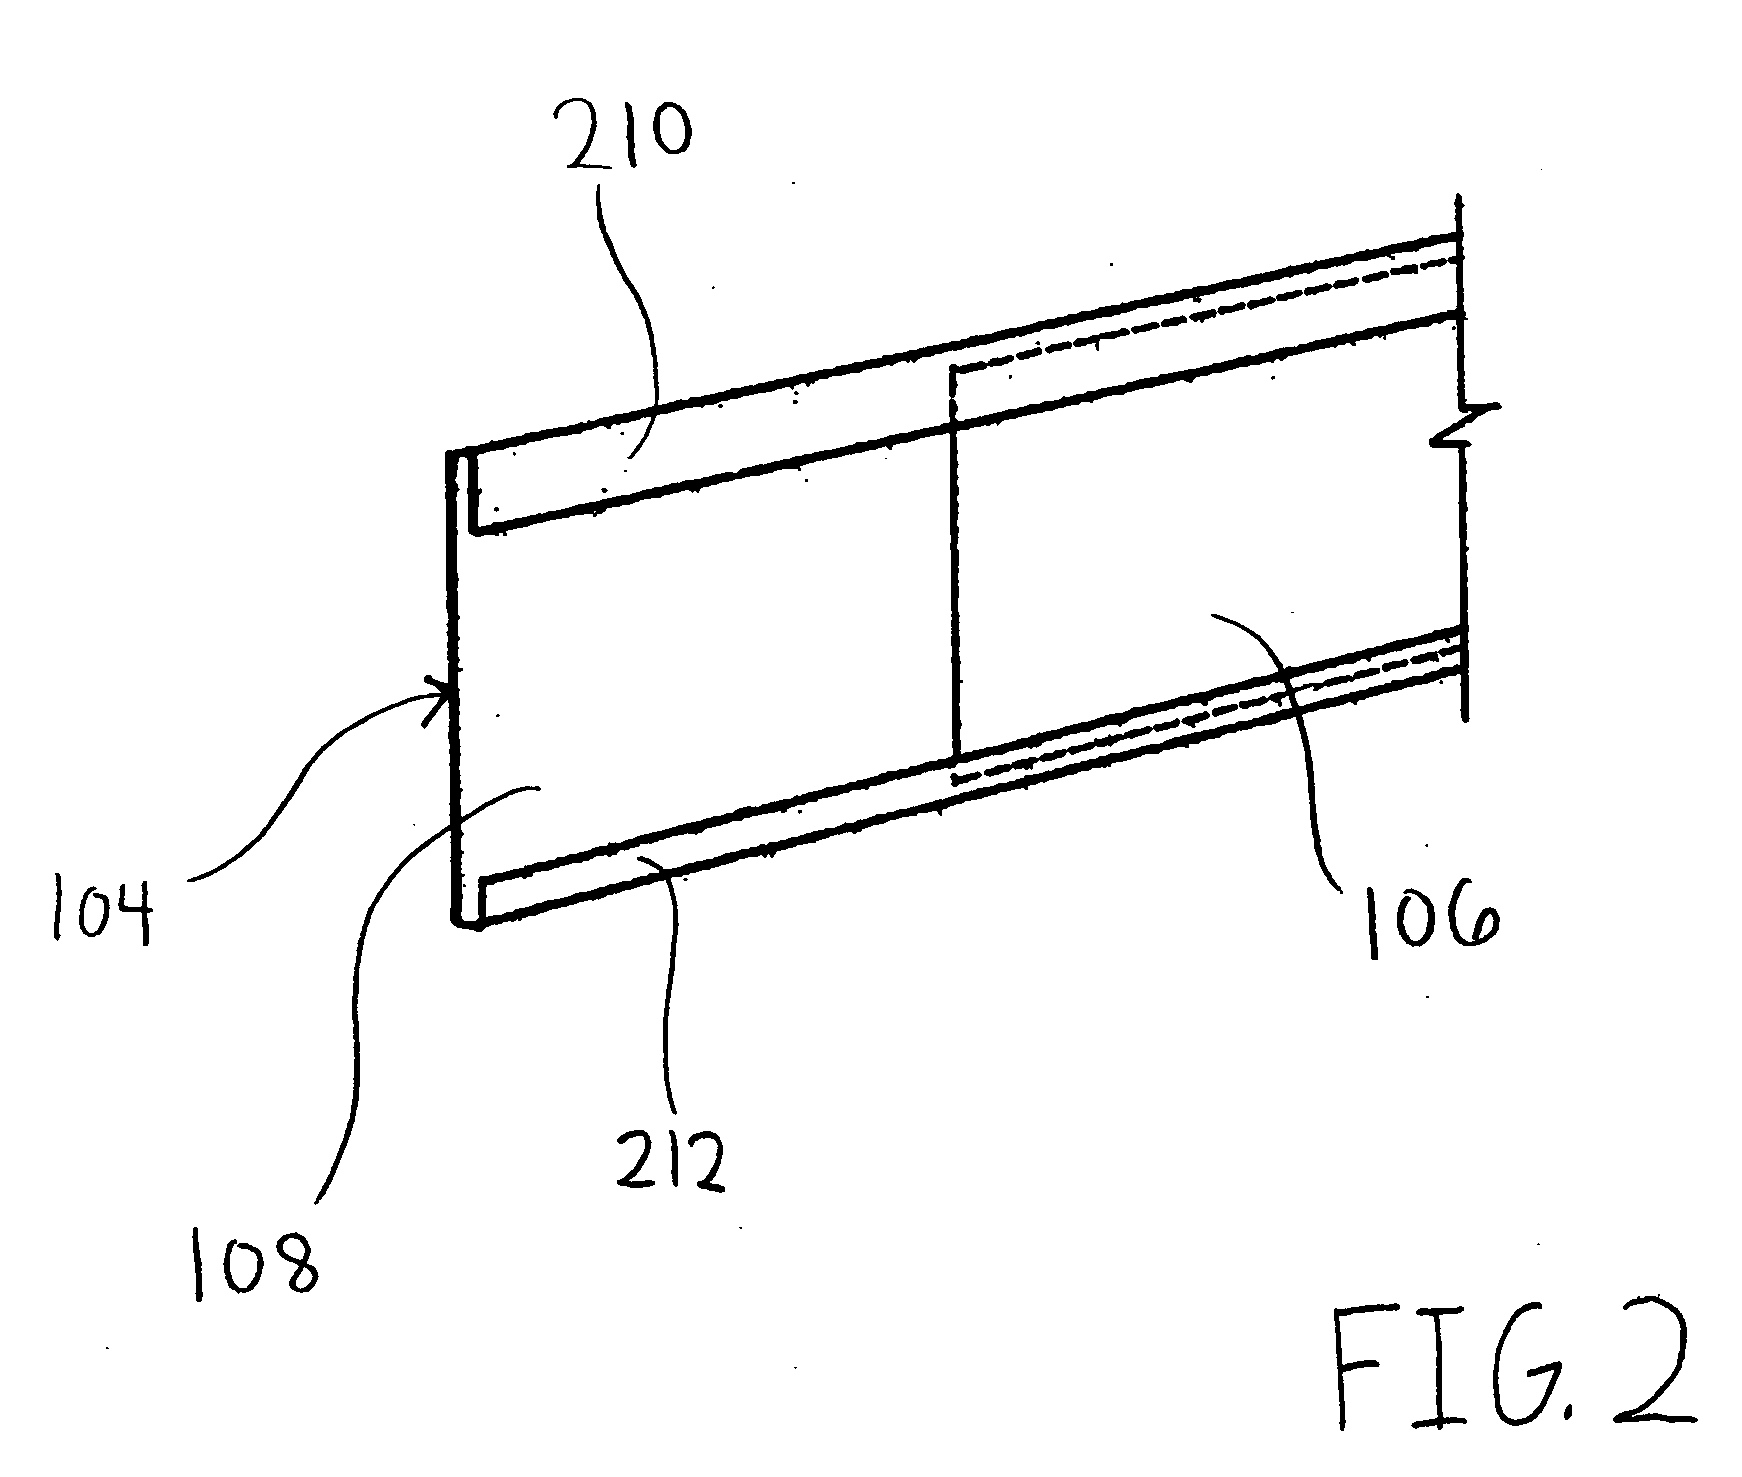 Landscape edging system and methods of use